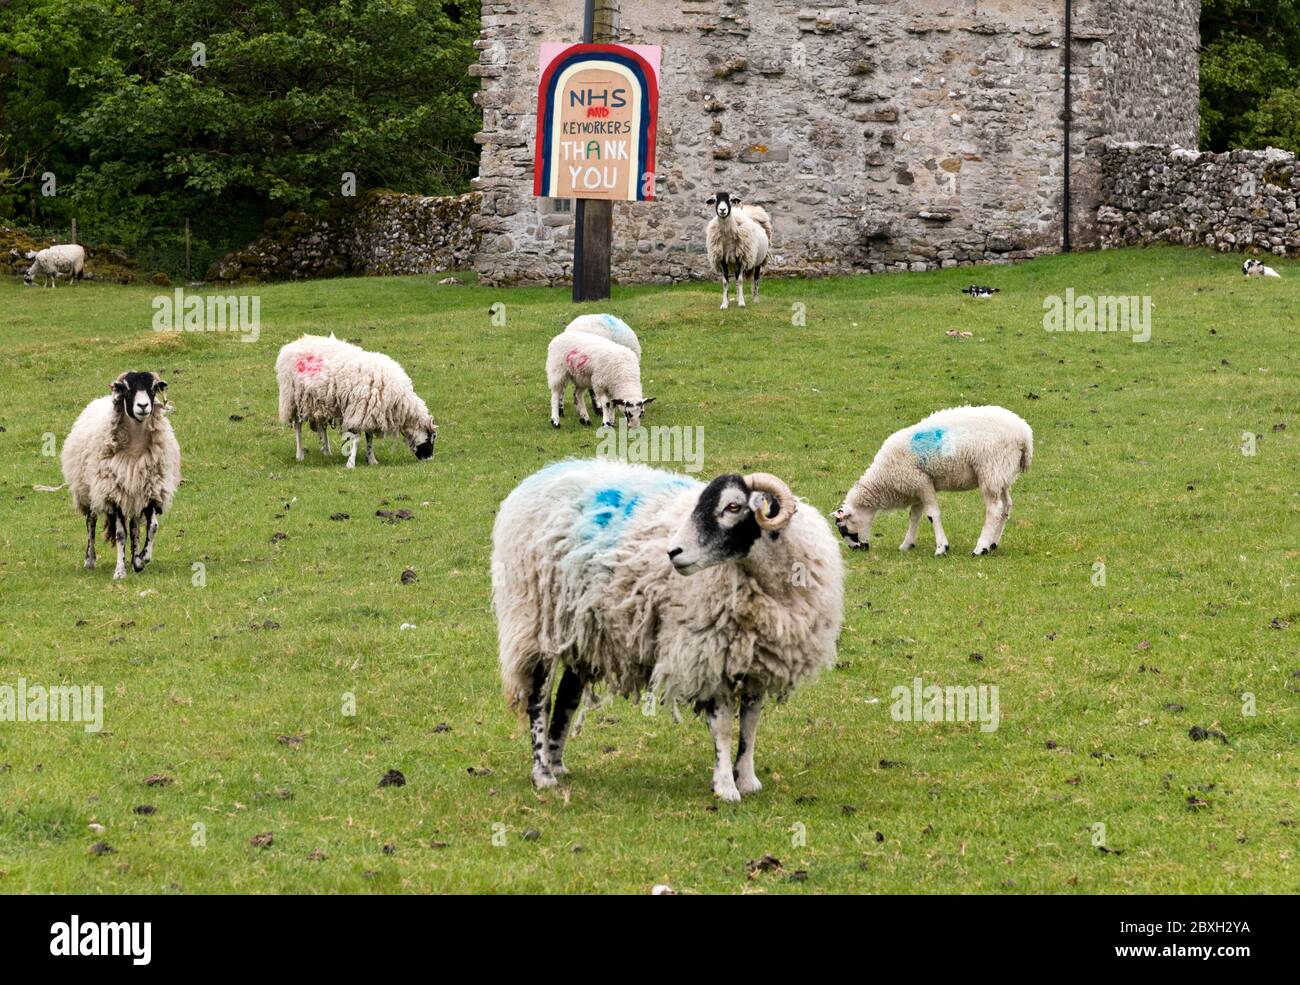 Sheep and lambs graze in front of a 'Thank You NHS Key Workers' sign, Littondale, Yorkshire Dales National Park, UK Stock Photo